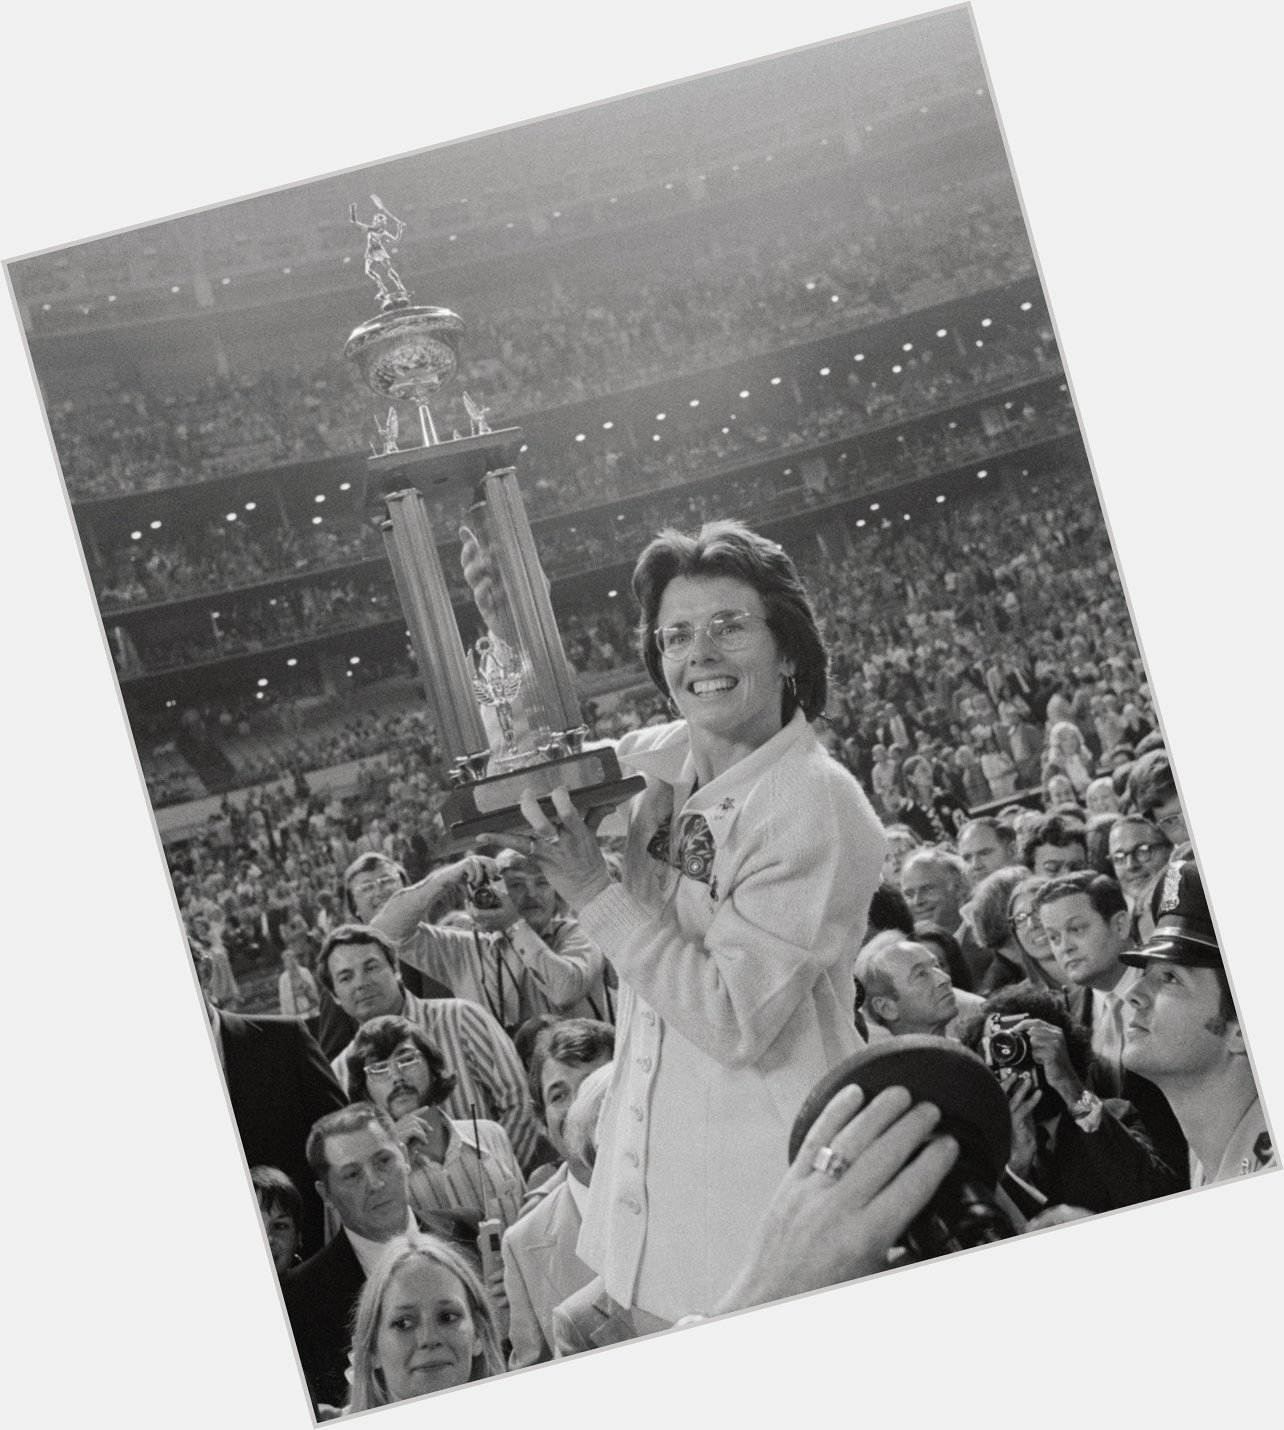 Happy Birthday to one of my heroes, Billie Jean King, born in 1943.   